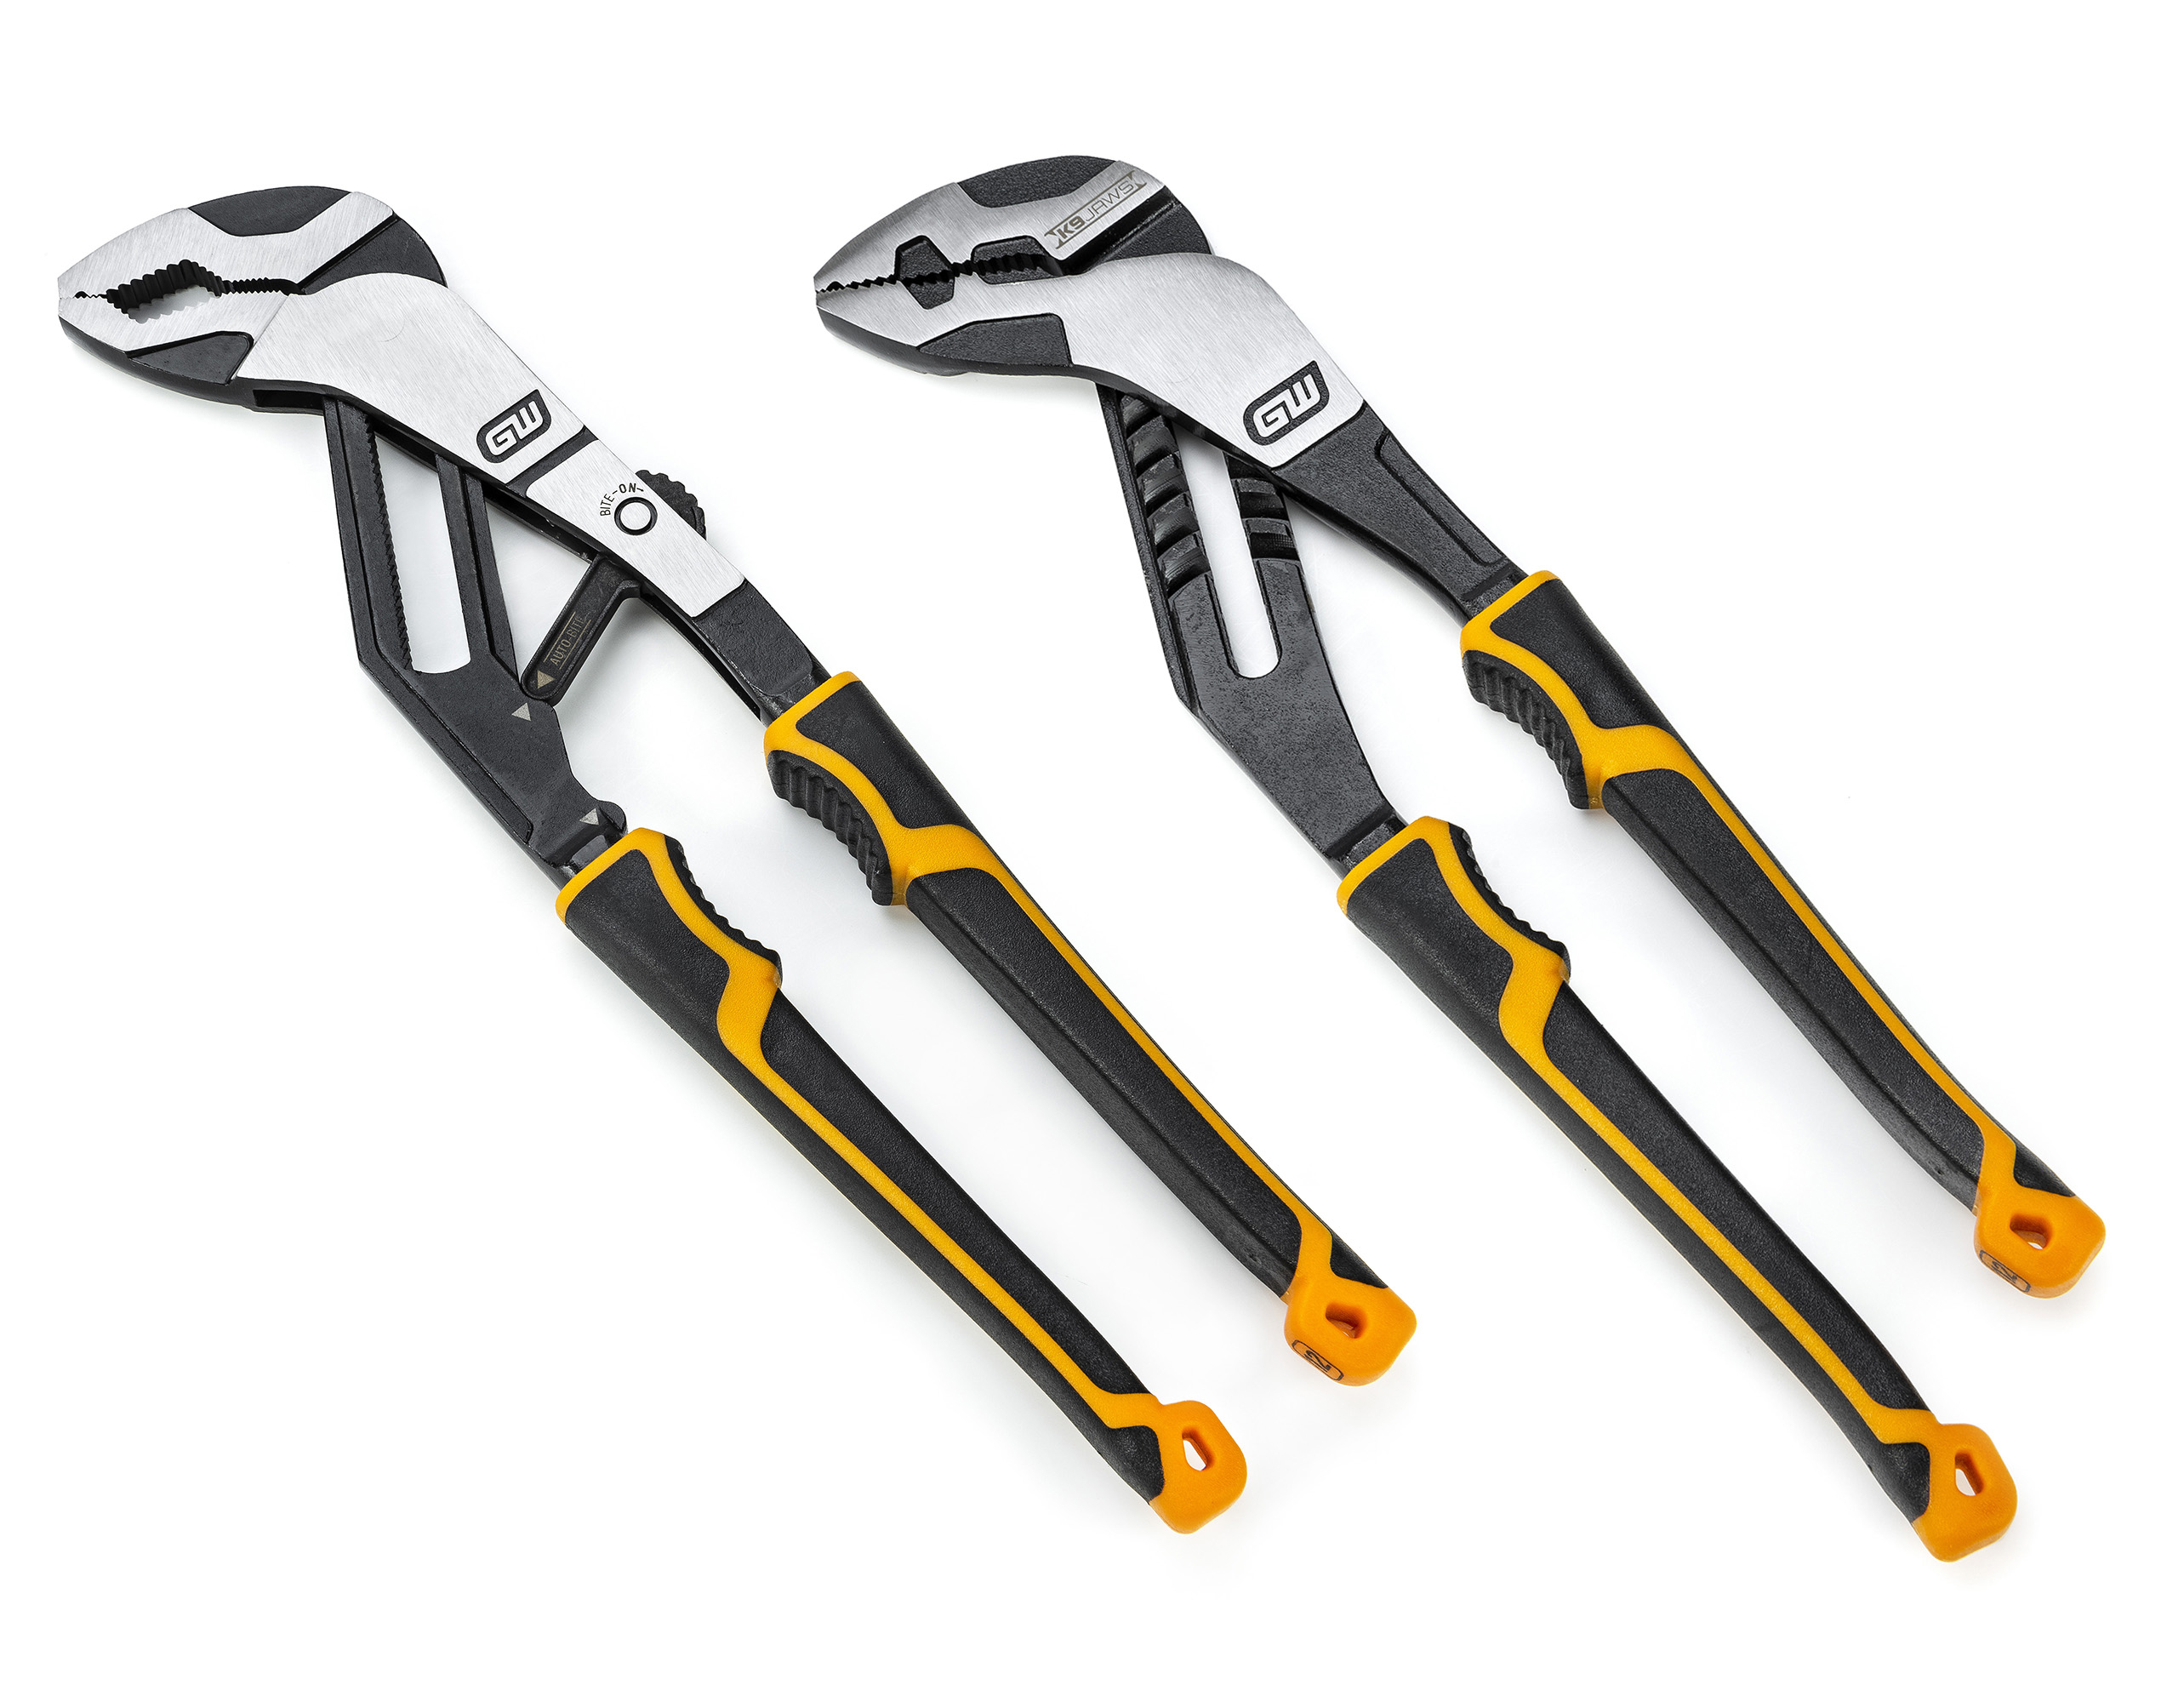 The new GEARWRENCH Pitbull Auto-Bite Tongue-and-Groove Pliers (left) and Pitbull K9 Straight Jaw Tongue-and-Groove Pliers (right) provide superior grip and comfort for the user.